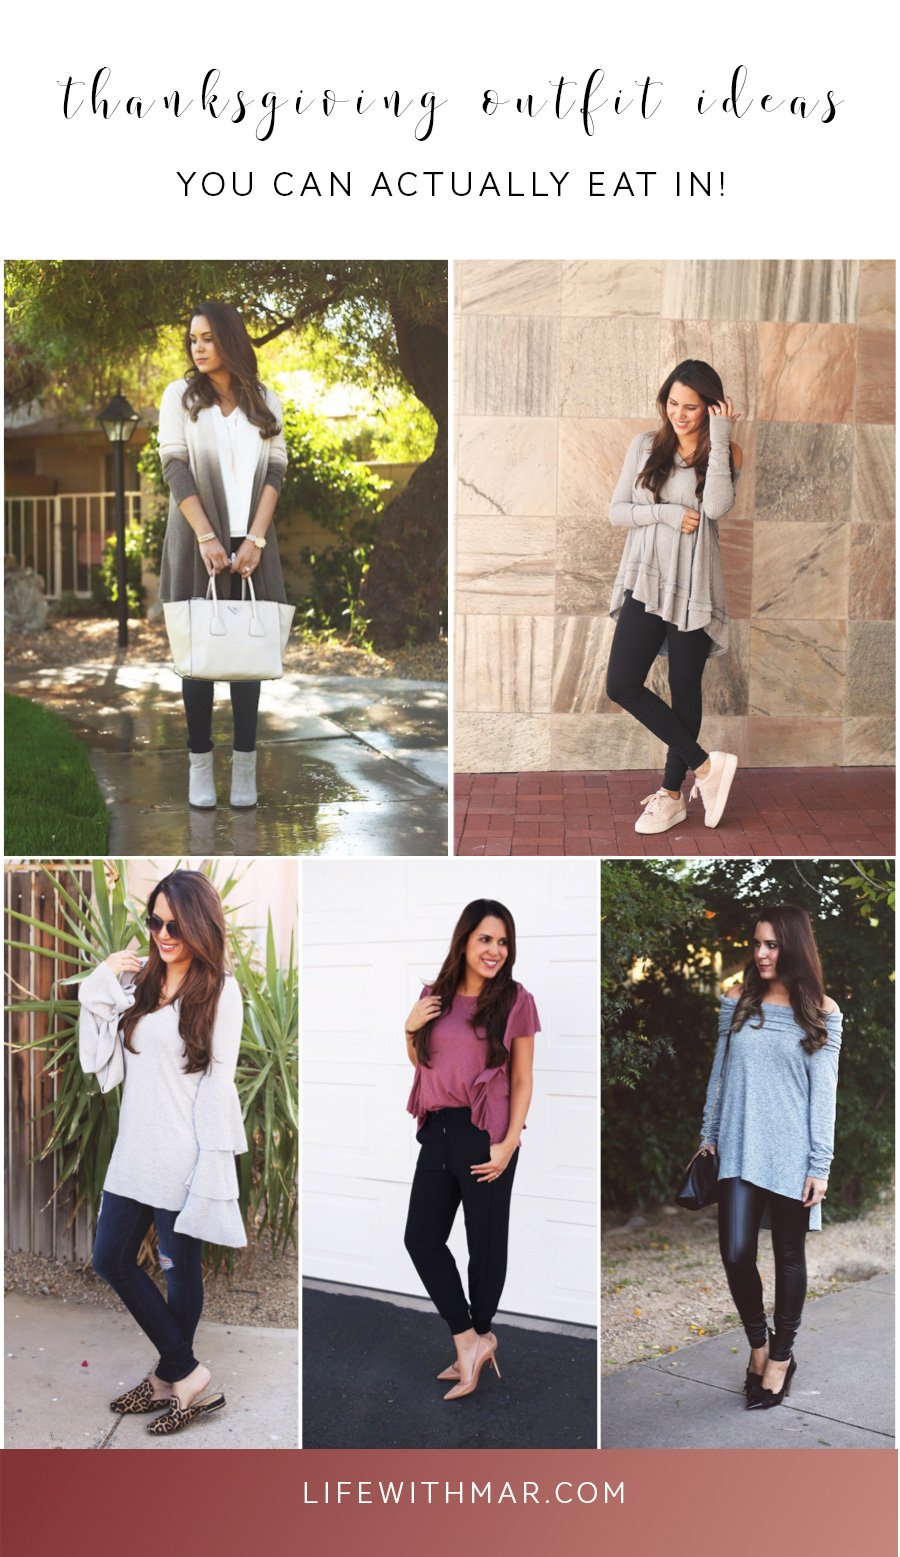 5 Thanksgiving outfitsyou can actually eat in. Cute and comfy Thanksgiving style!